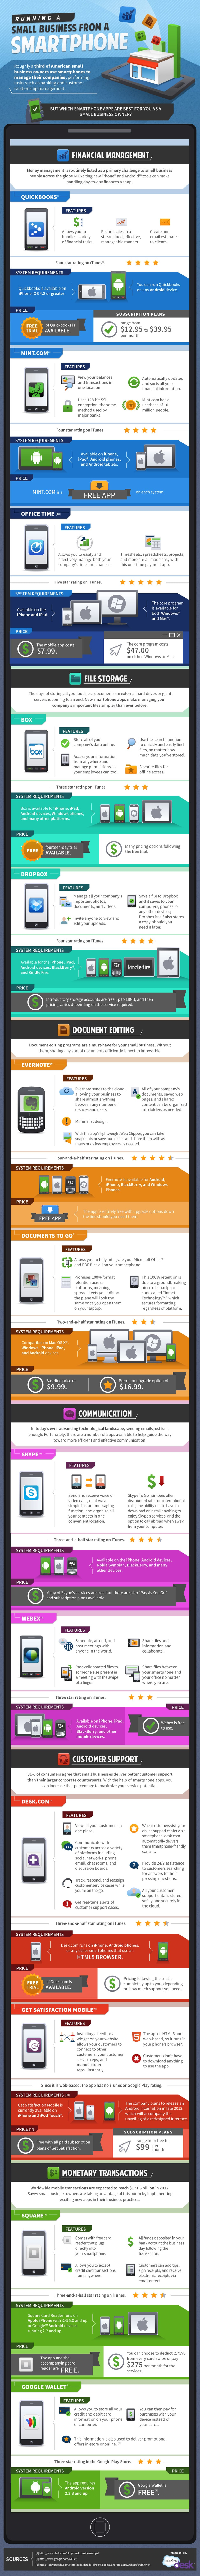 Useful Smartphone Apps For Small Business Owners [Infographic]